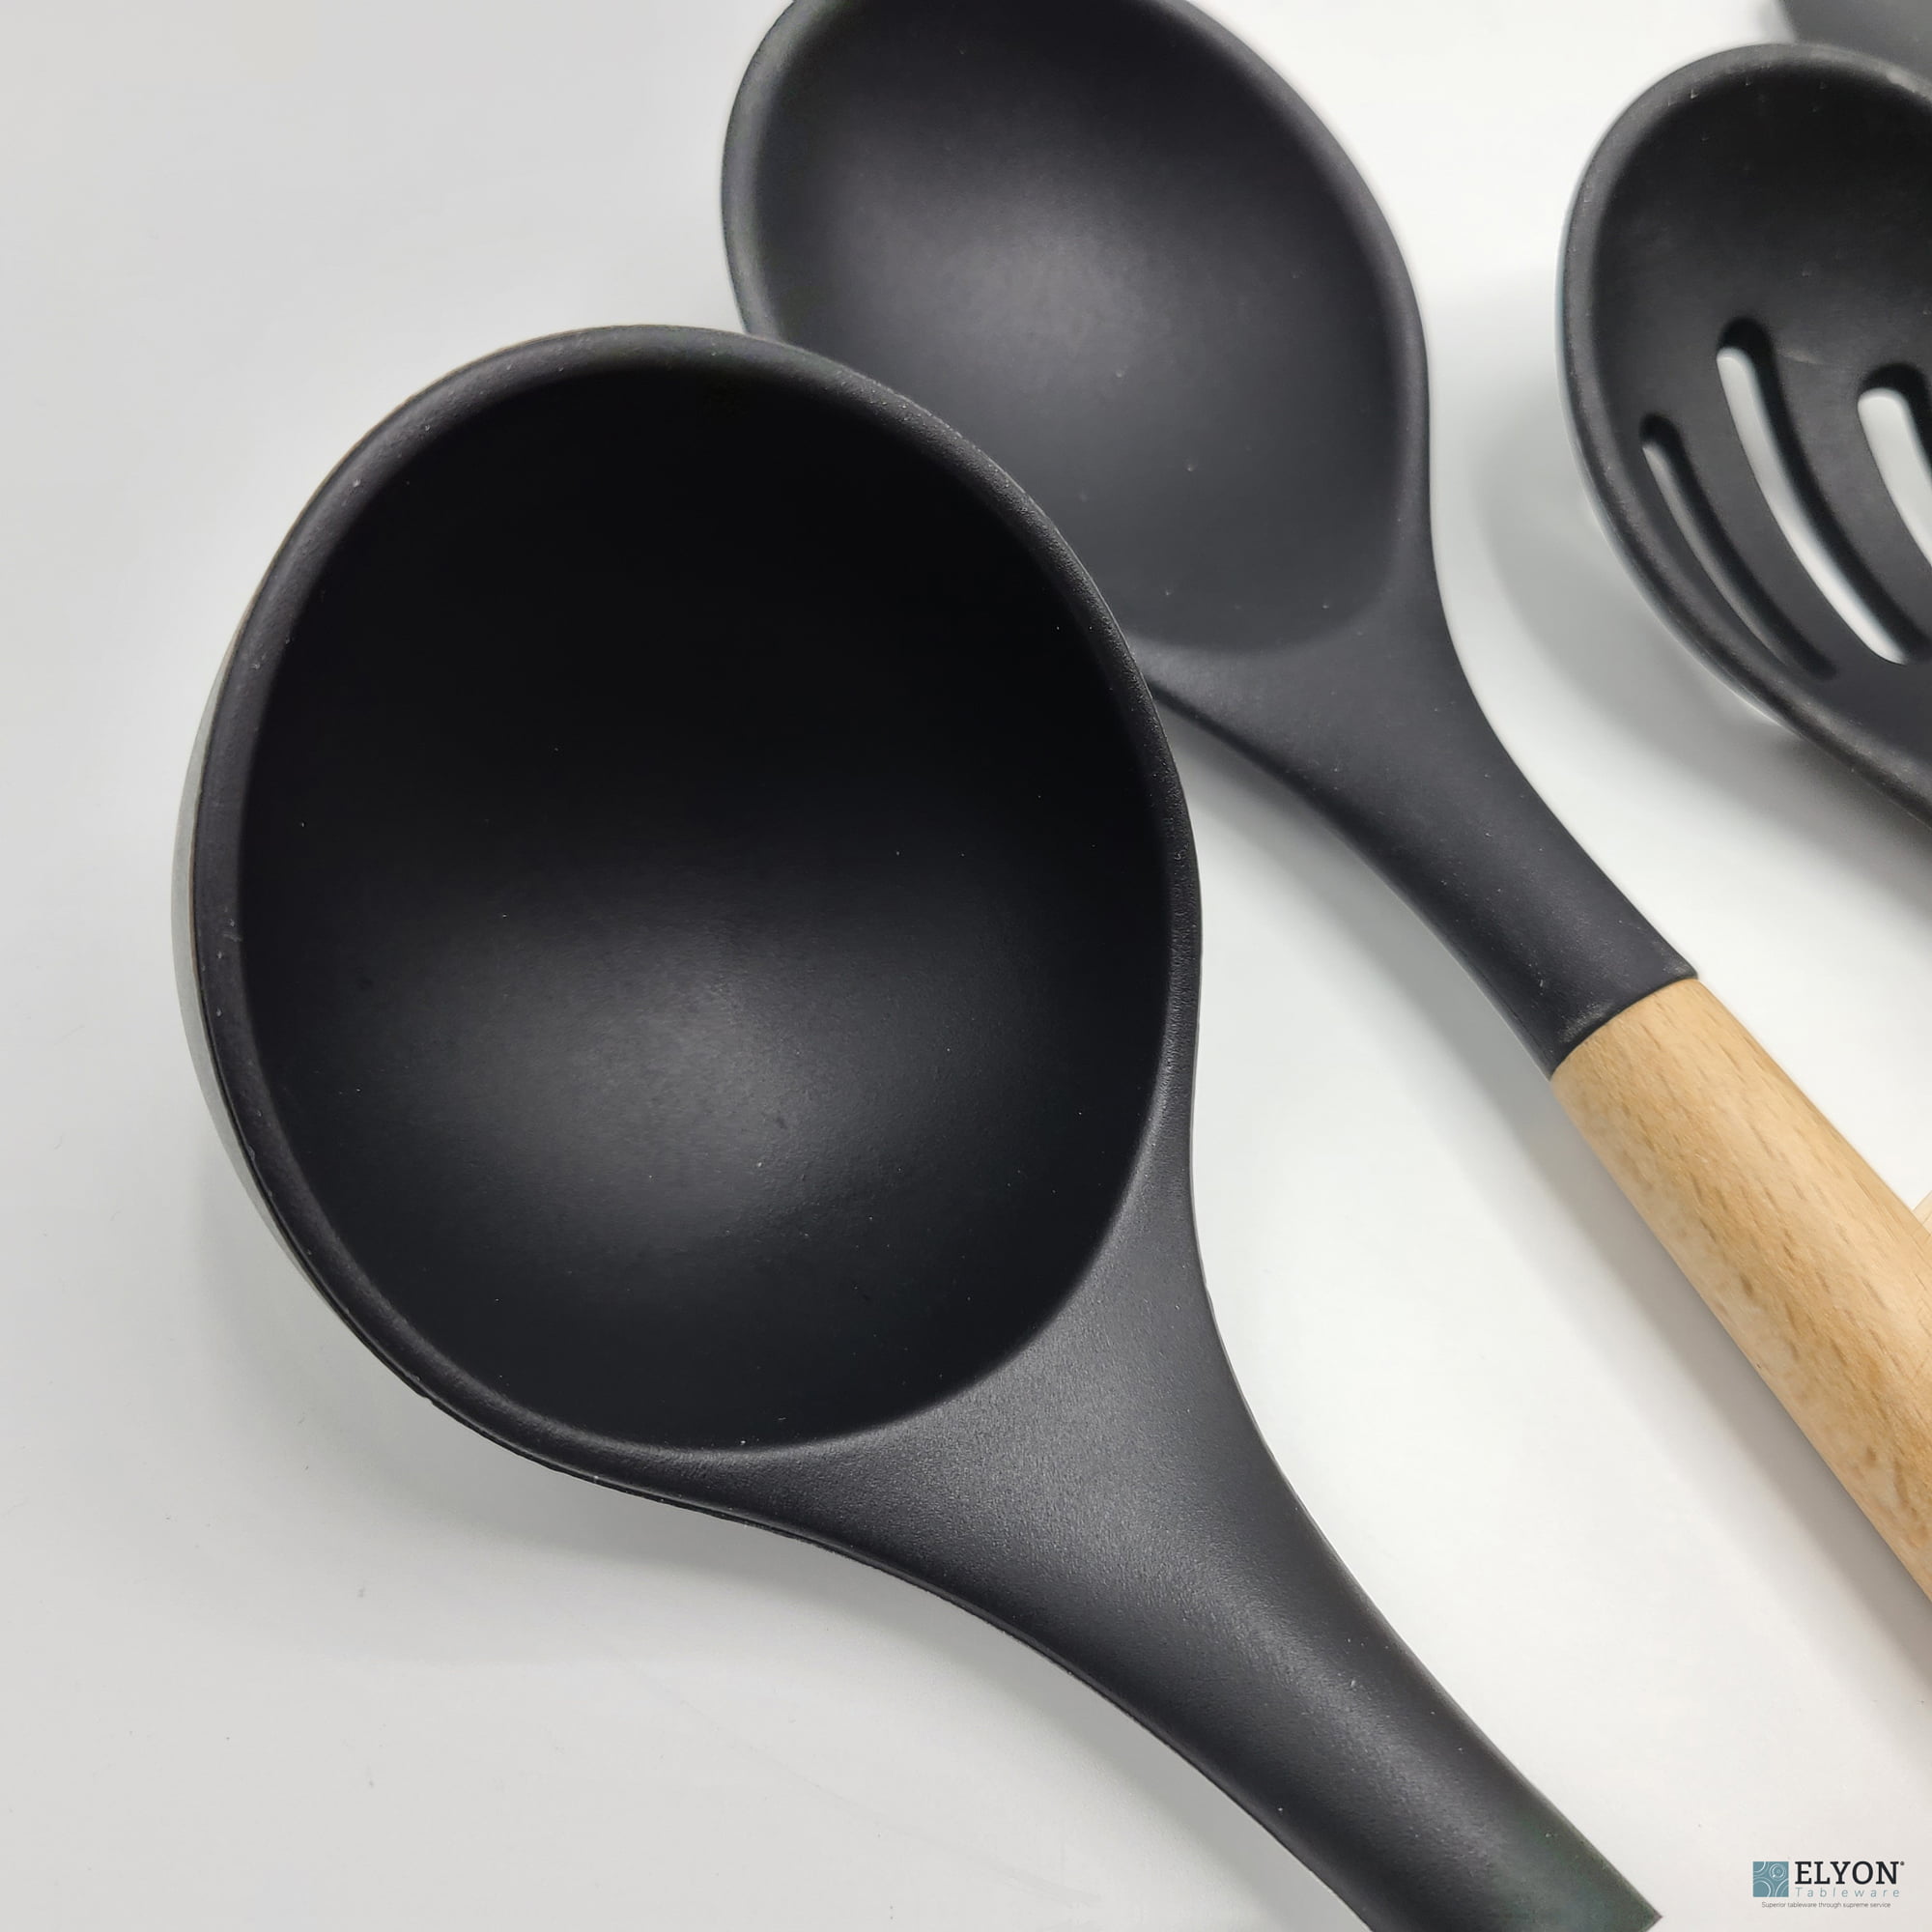 Elyon Best Modern 9-piece-silicon-kitchen-cooking-utensils-set-Mint-green.  Elyon Tableware - Your Shop for Everything Tableware